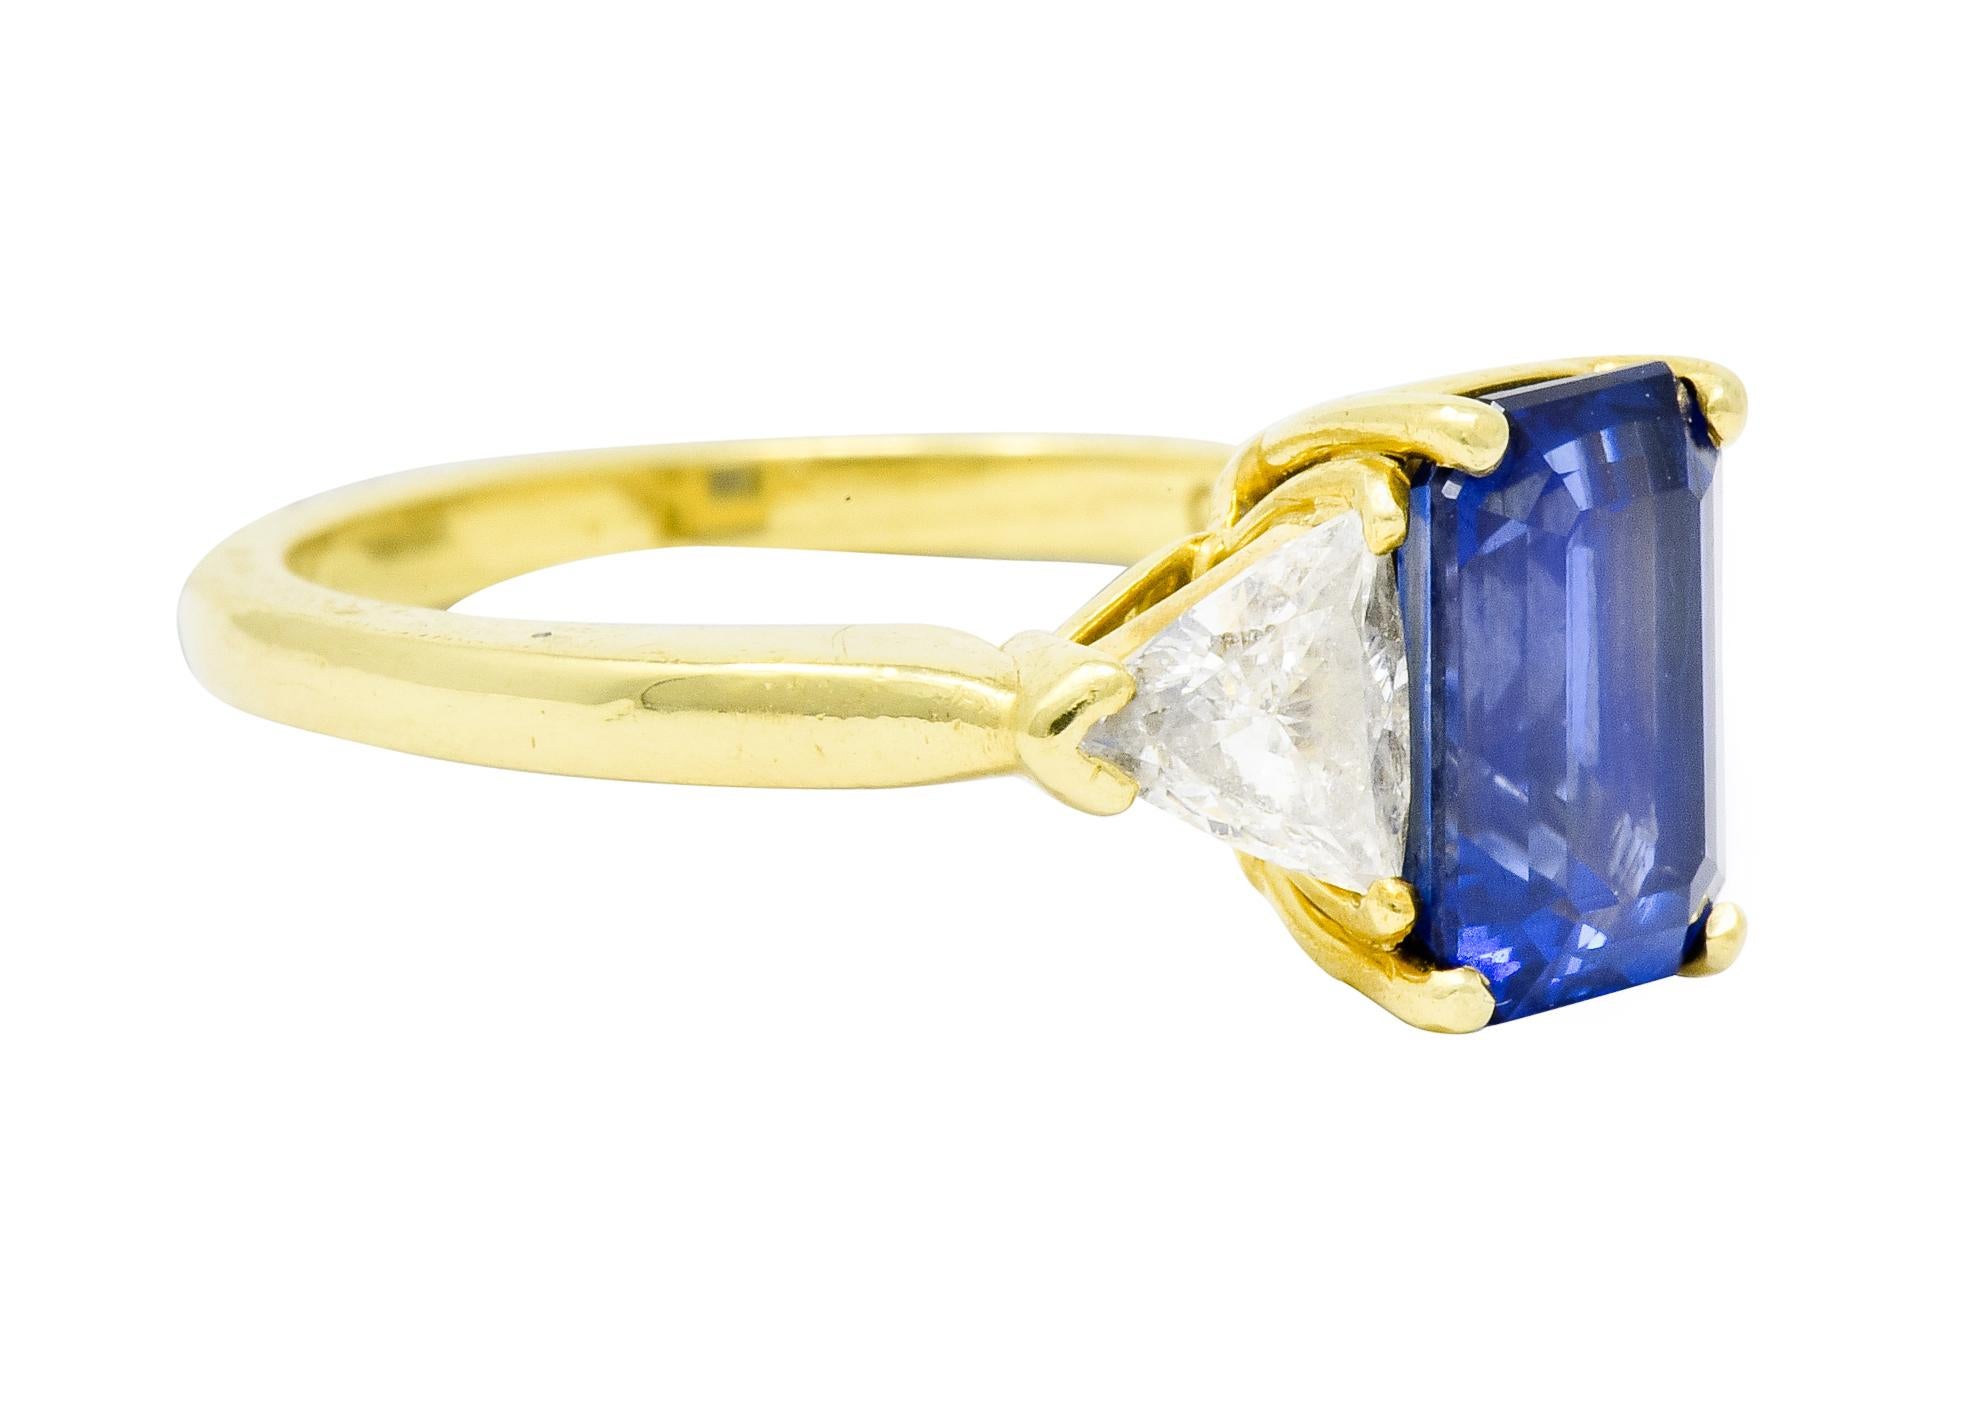 Centering a basket set rectangular step cut sapphire weighing approximately 2.60 carats; eye-clean with bright blue color

Flanked by two trillion cut diamonds weighing in total 0.60 carat, G color with VVS clarity

With maker's mark and stamped 18K